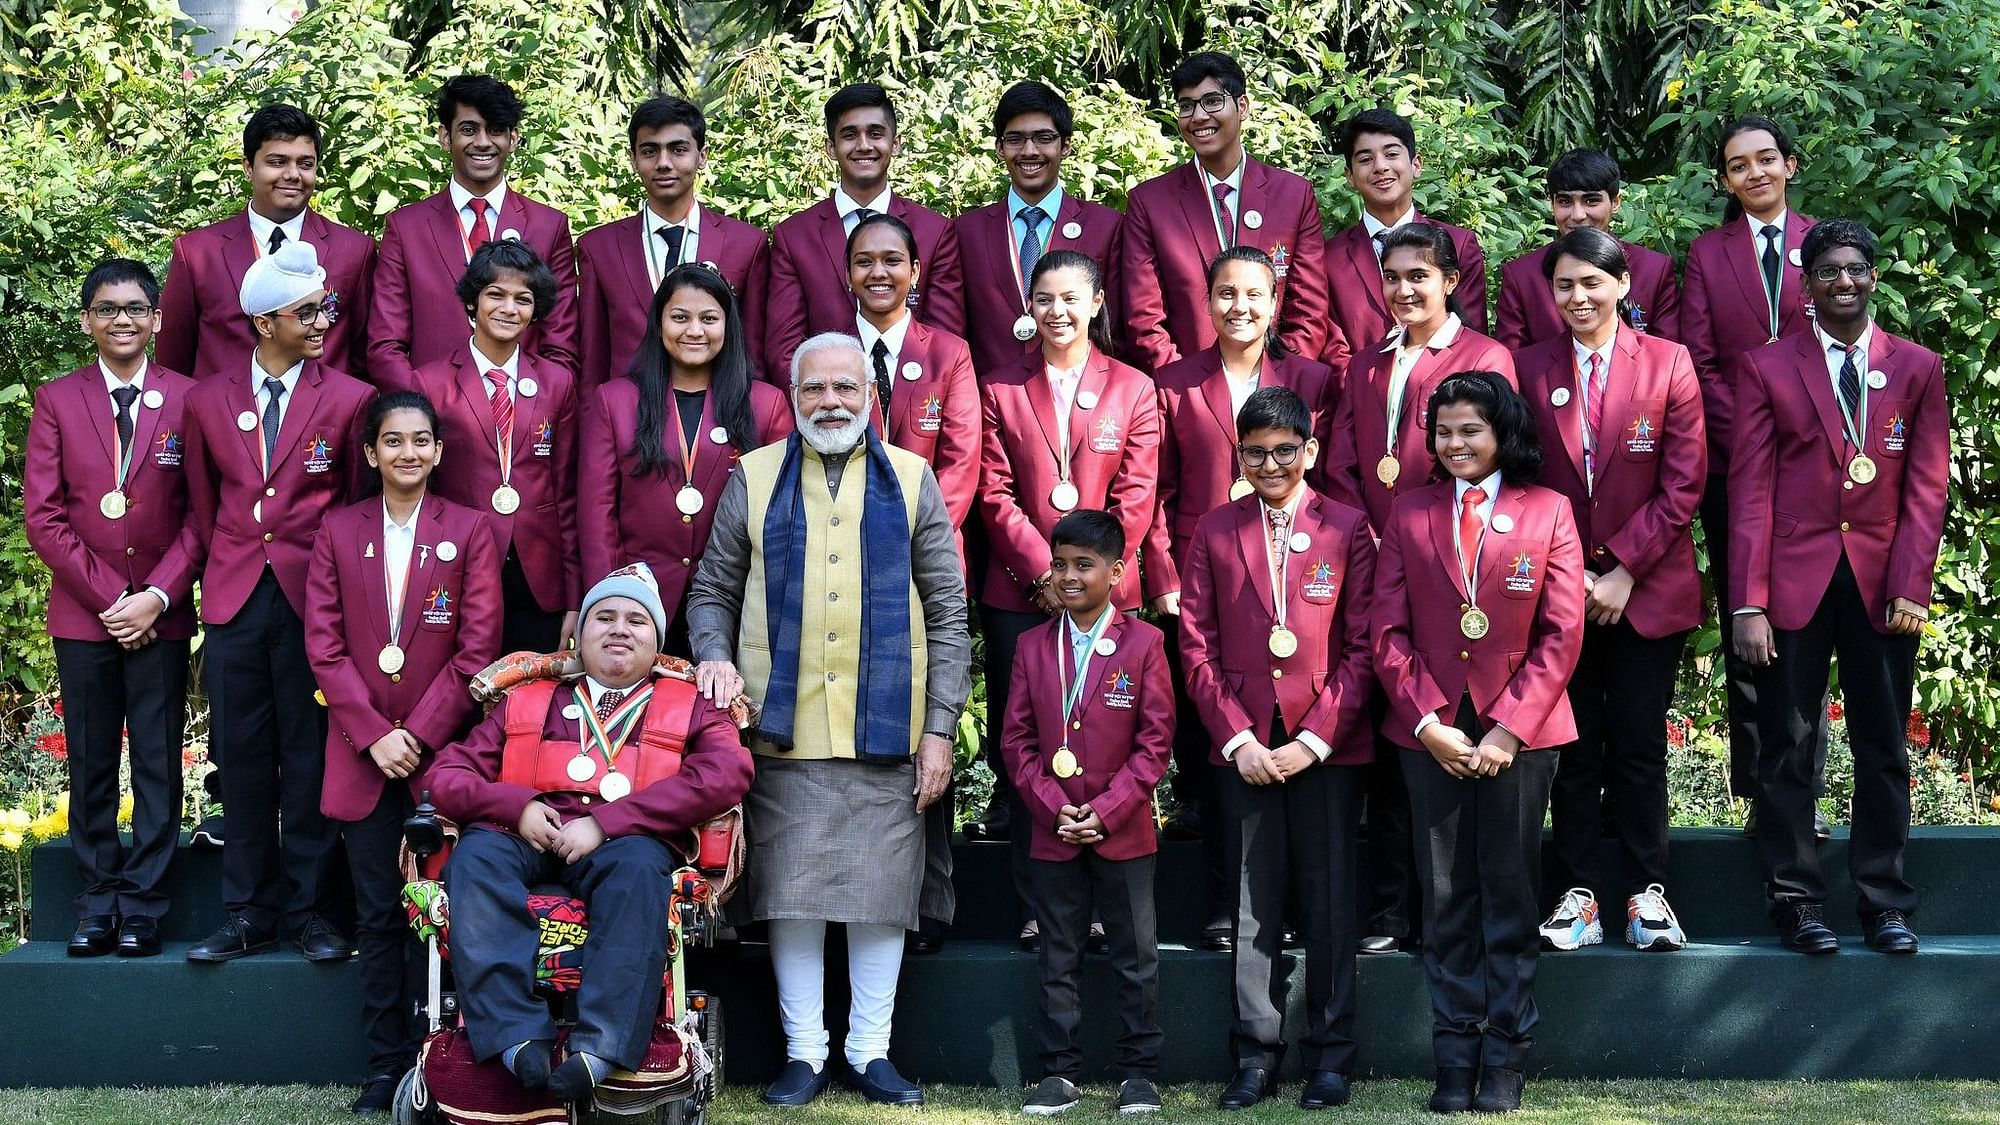 Prime Minister Narendra Modi on Friday, 24 January, lauded the work done by children who won national awards in various categories, saying he gets inspiration and energy from them.